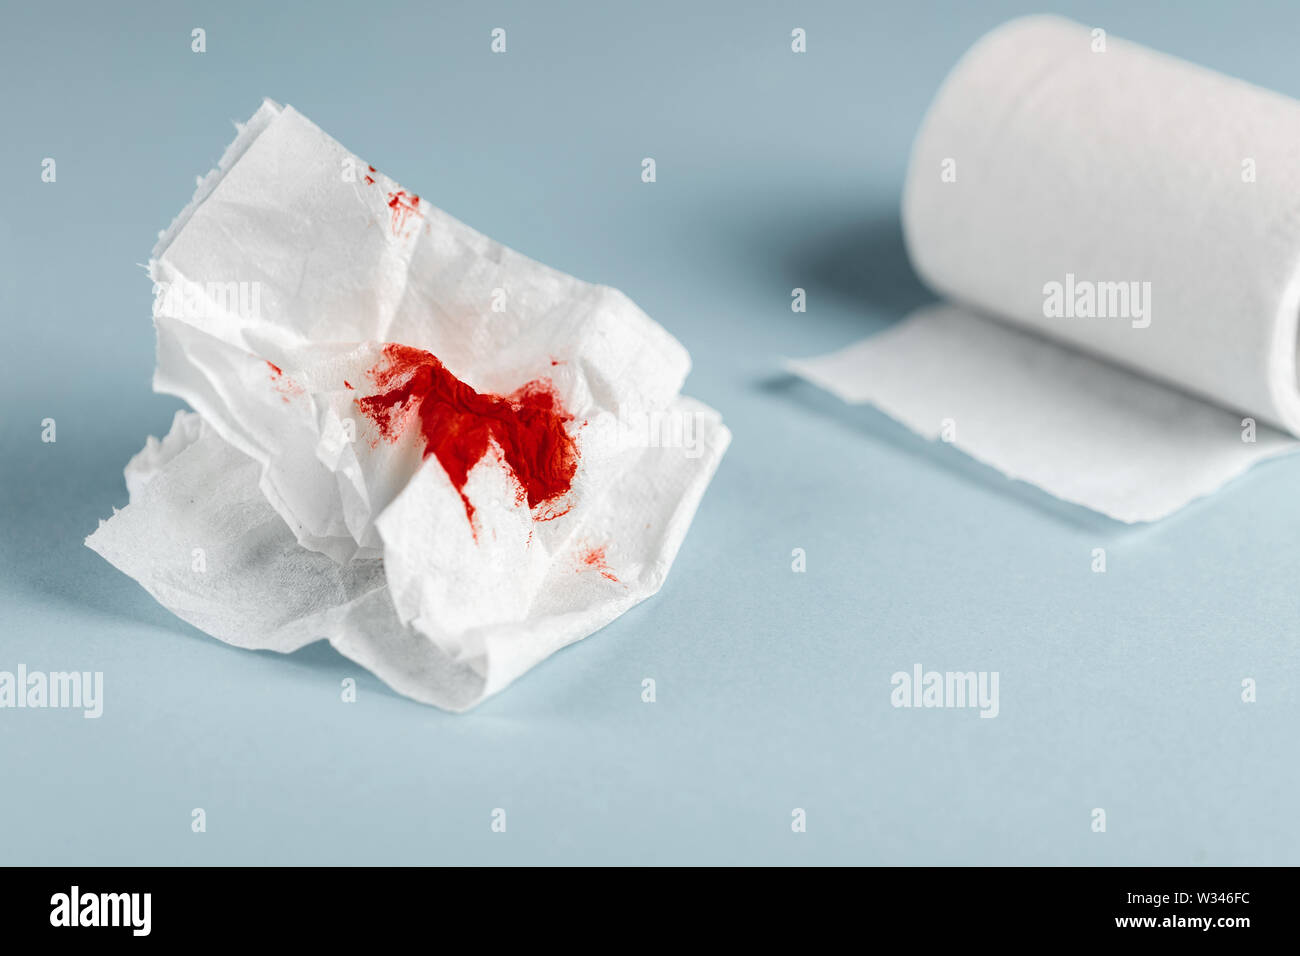 A photo of used bloody toilet paper and a toilet paper roll on the light blue background Stock Photo